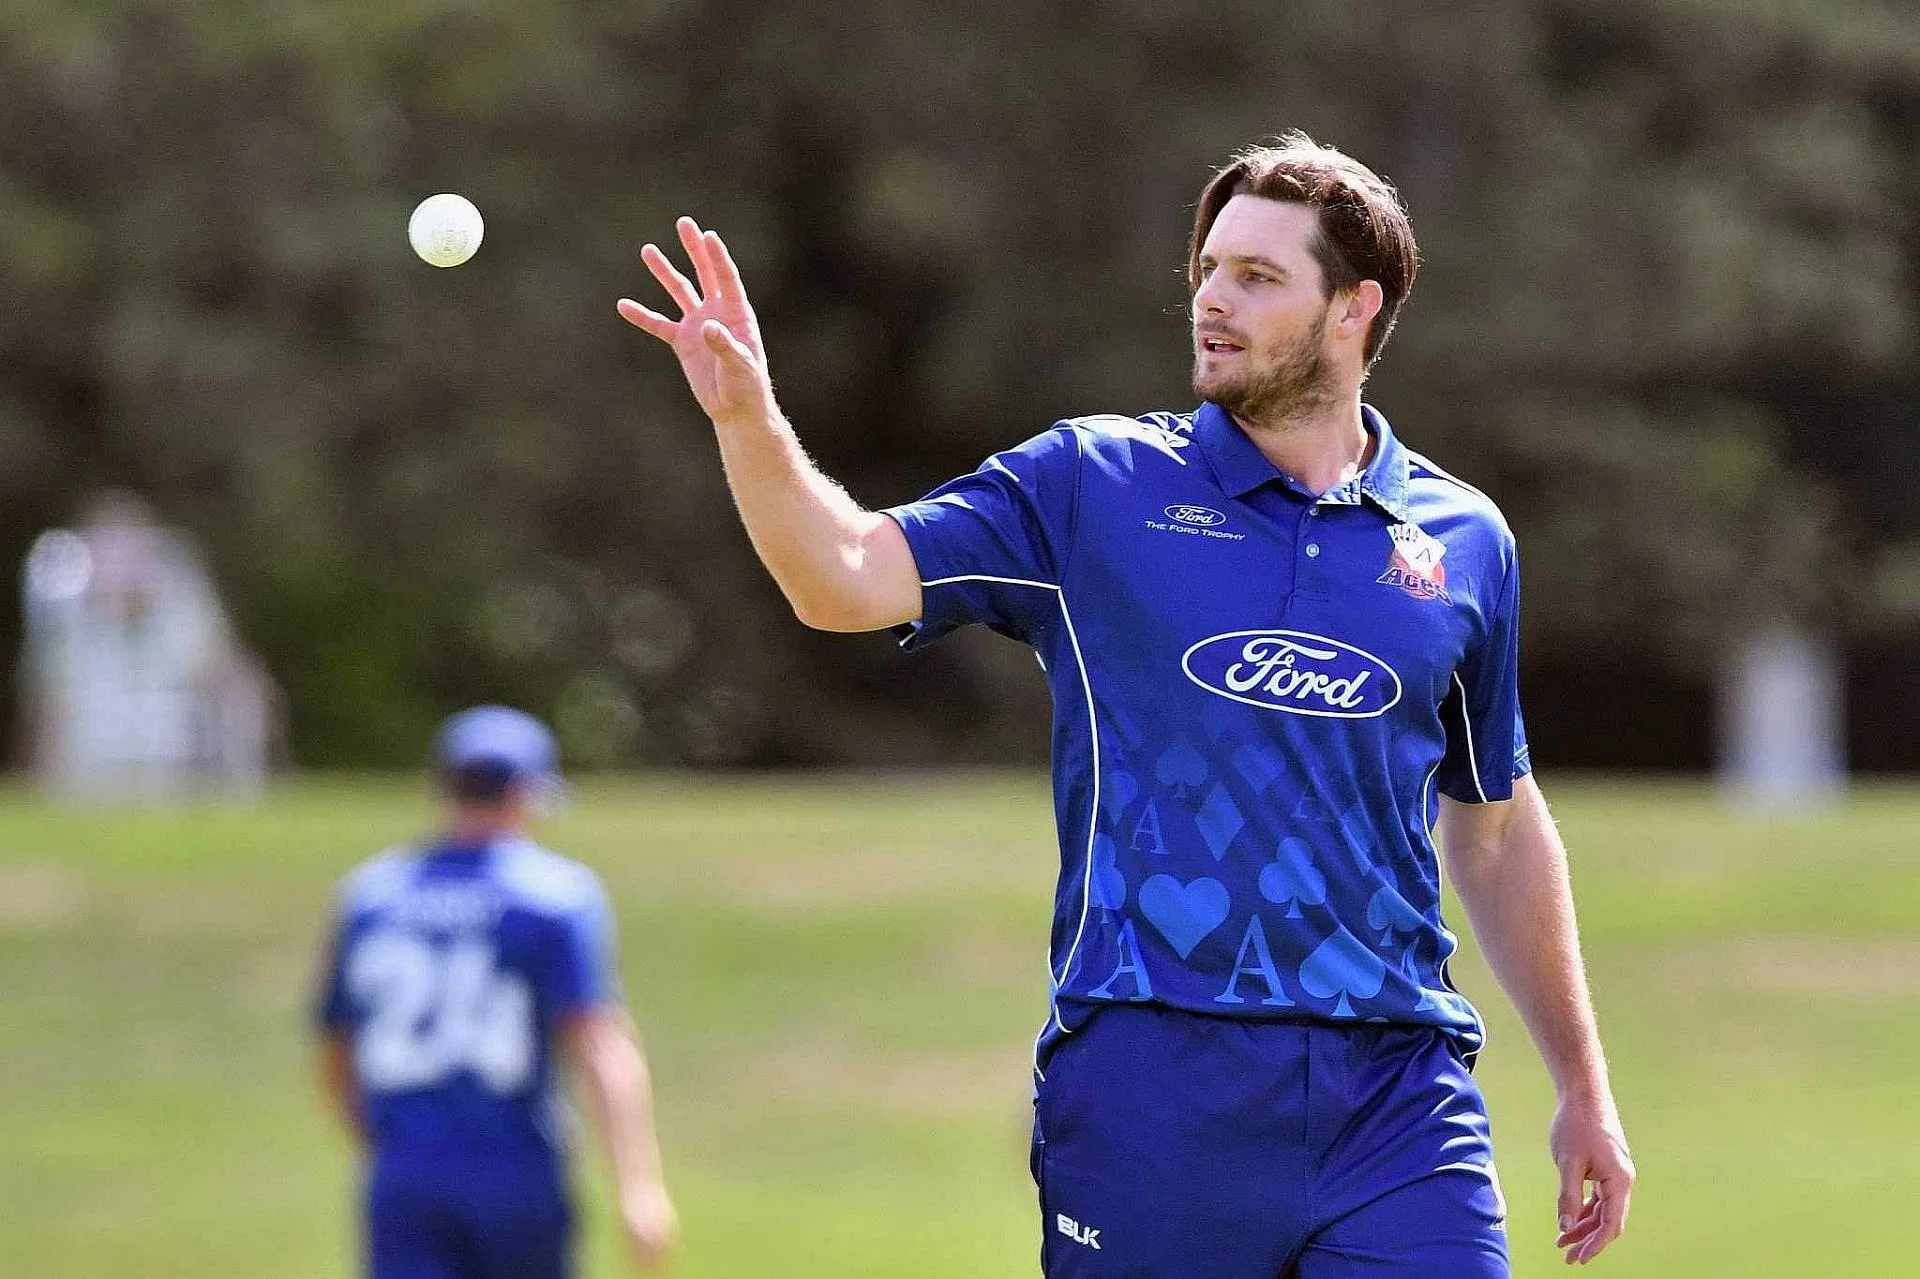 MI Emirates Appoint Mitchell McClenaghan As Bowling Coach